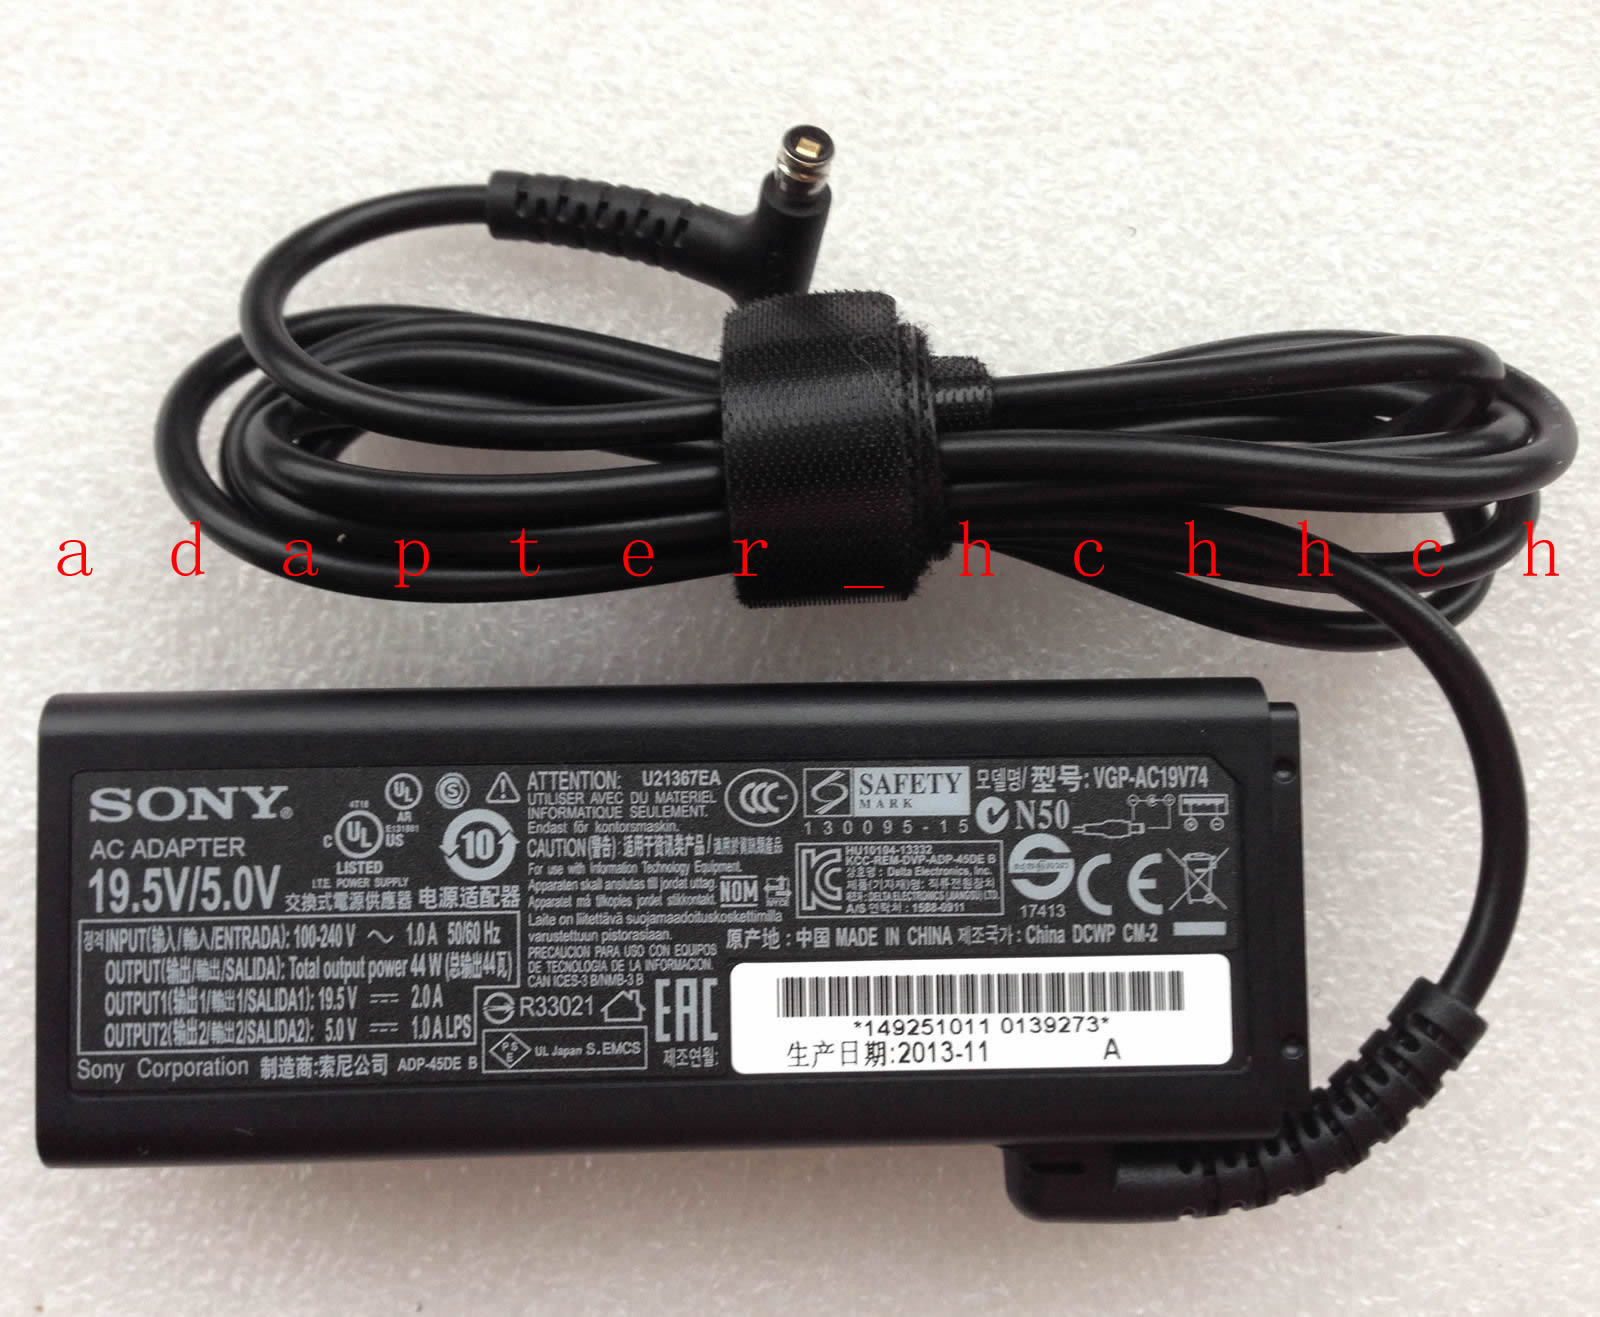 Original OEM Sony AC Adapter for VAIO Tab 11 SVT11213CXB,VGP-AC19V74 Tablet PC Bundled Items: Power Cable Output Volt